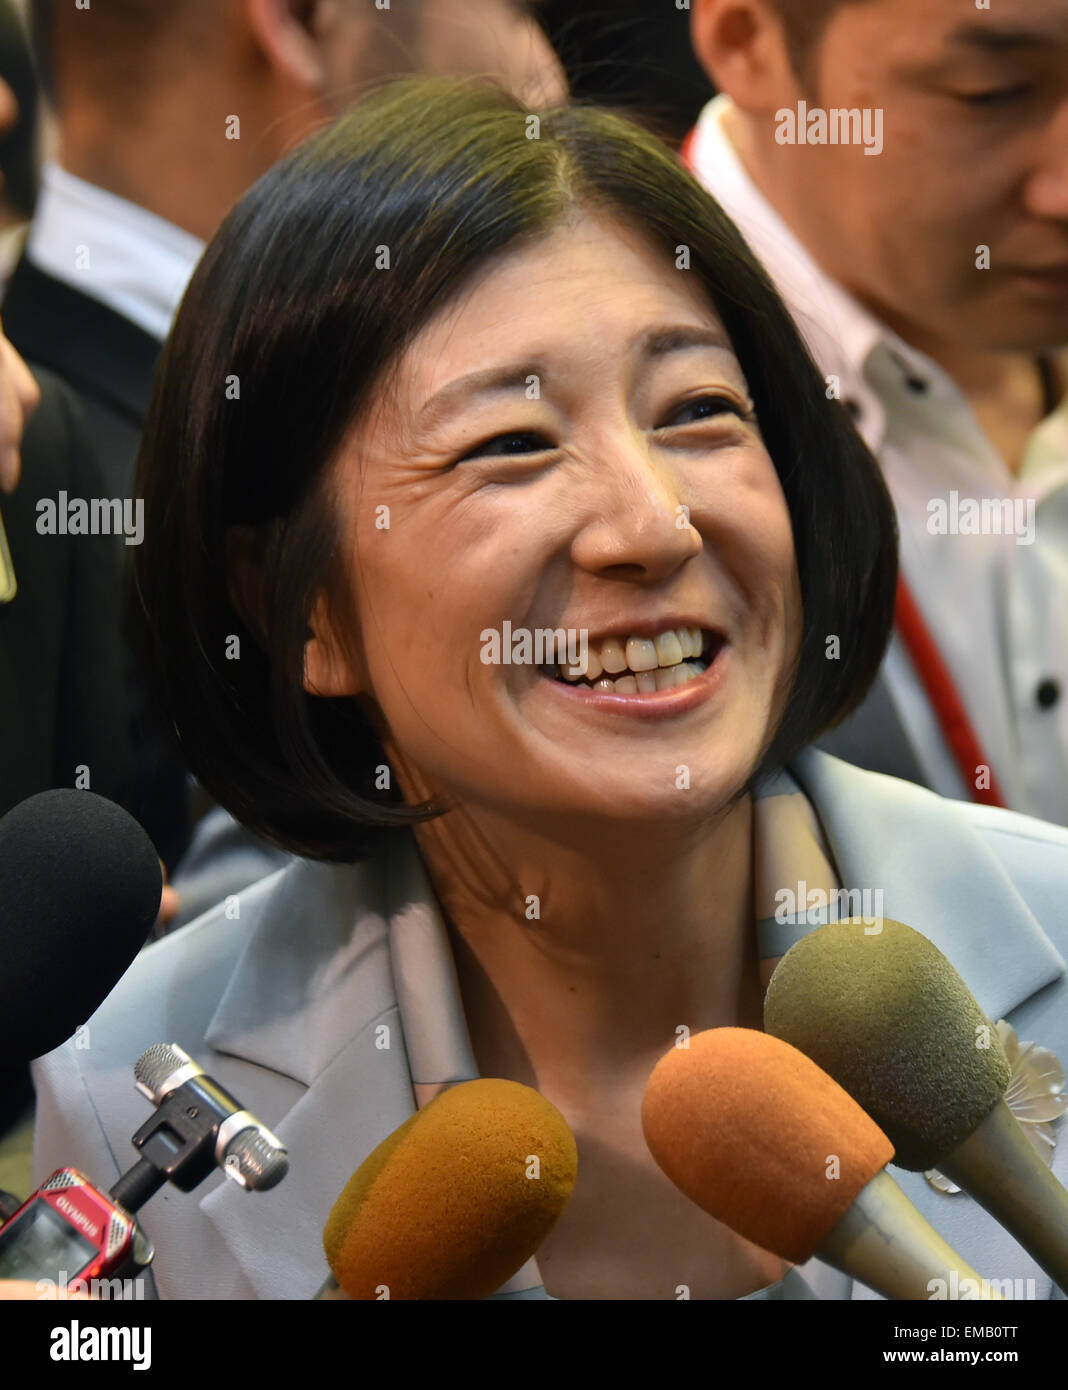 Tokyo, Japan. 18th Apr, 2015. President Kumiko Otsuka of Japanese upscale furniture retailer Otsuka Kagu speaks to the media in front of the newly-refurbished showroom in Tokyos Shinjuku district at the start of a bargain sale on Saturday, April 18, 2015. The high-profile clash between father and chairman, Katsuhisa Otsuka, and daughter and president over the family-run business was settled in March as the daughter fended off her fathers attempt to oust the president with shareholders voting in favor of her continuing to manage the company. © Natsuki Sakai/AFLO/Alamy Live News Stock Photo